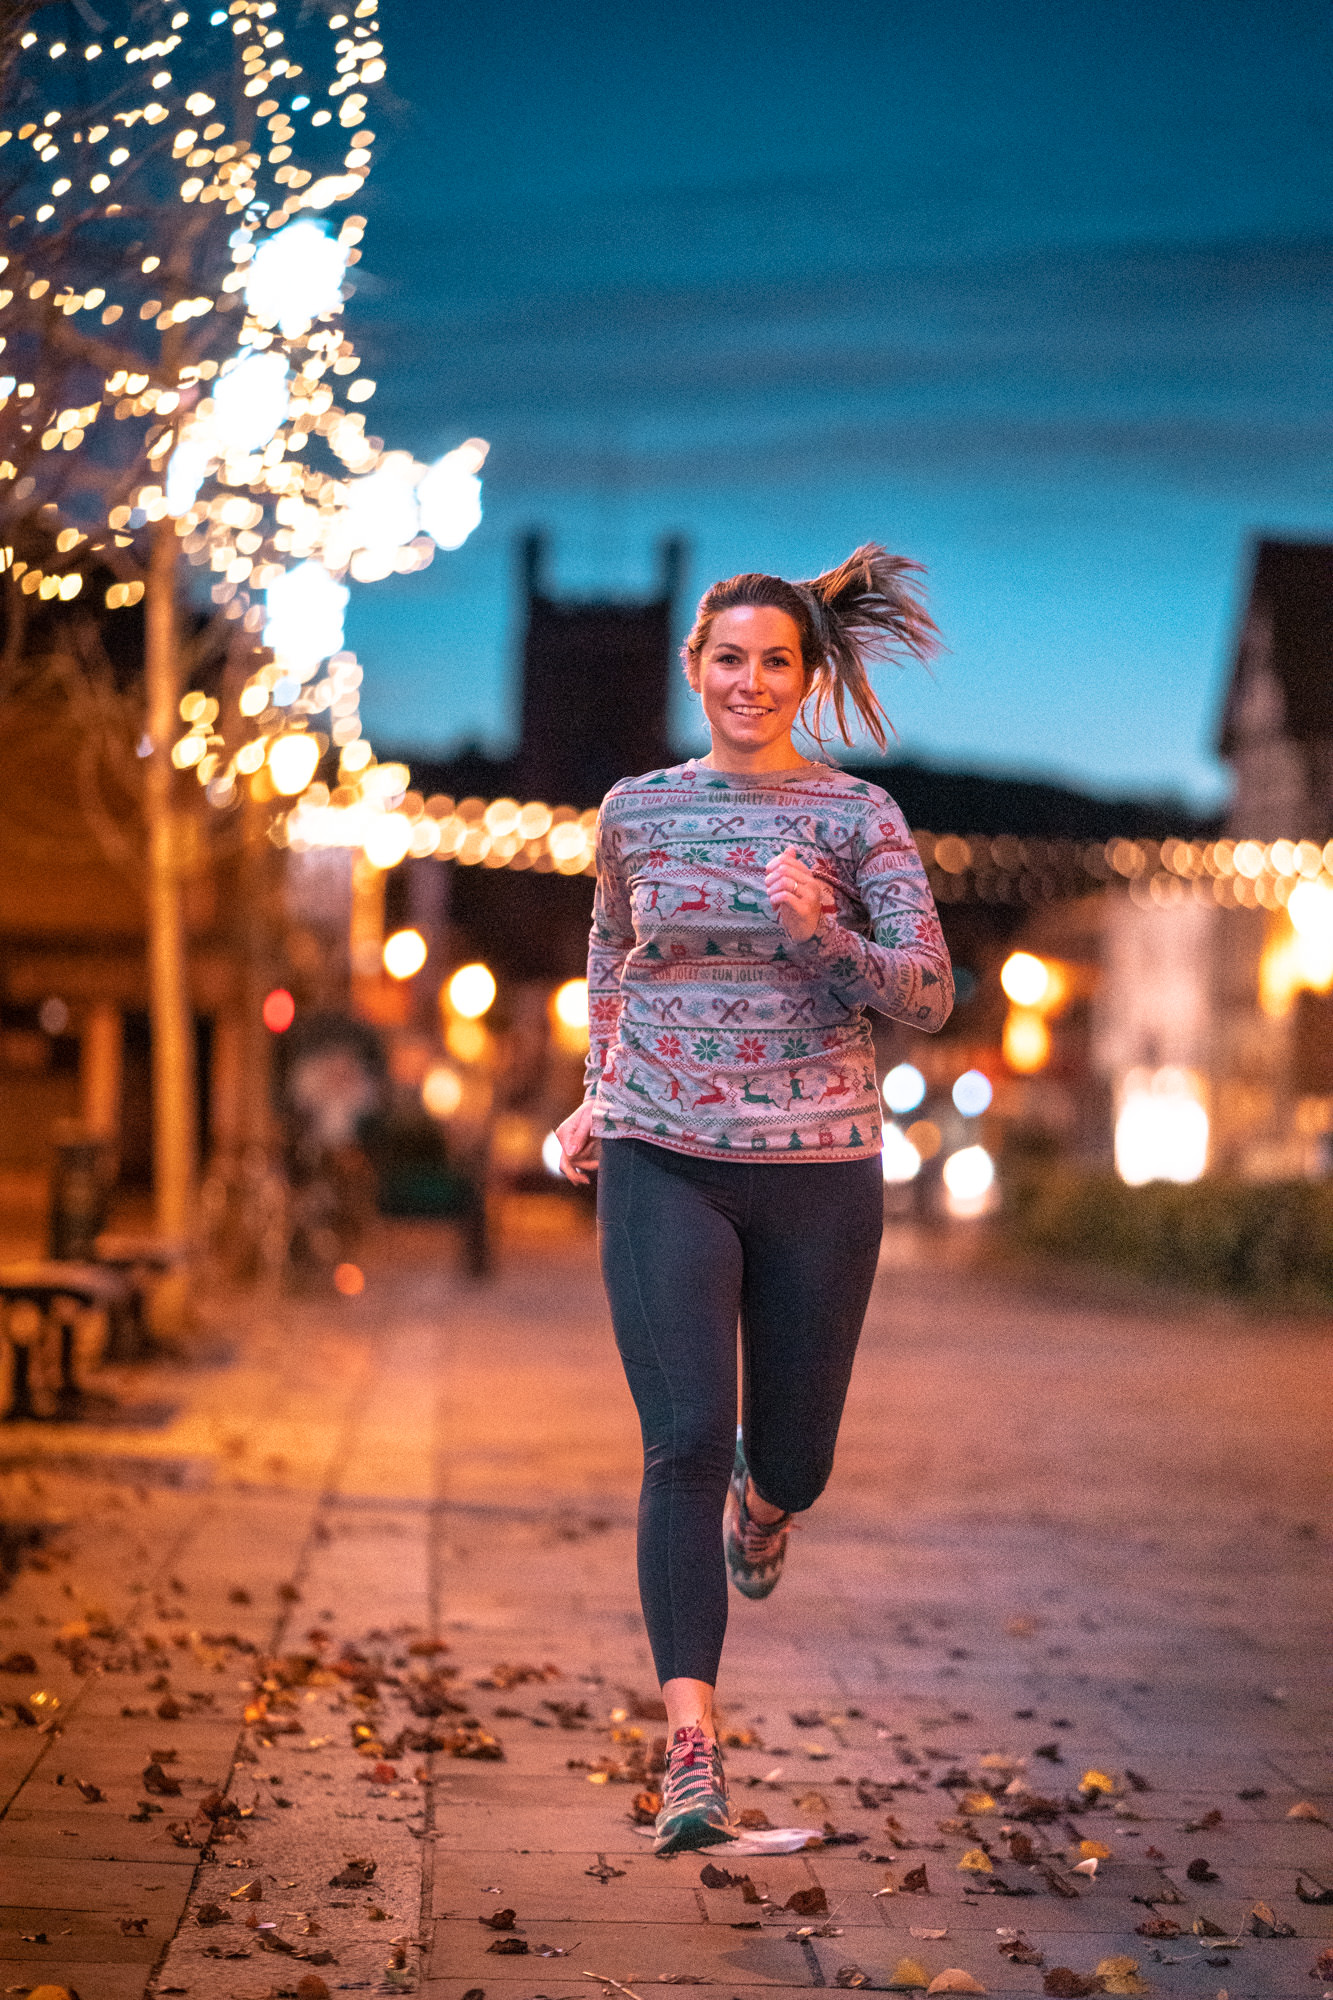 THE BEST CHRISTMAS GIFTS FOR RUNNERS